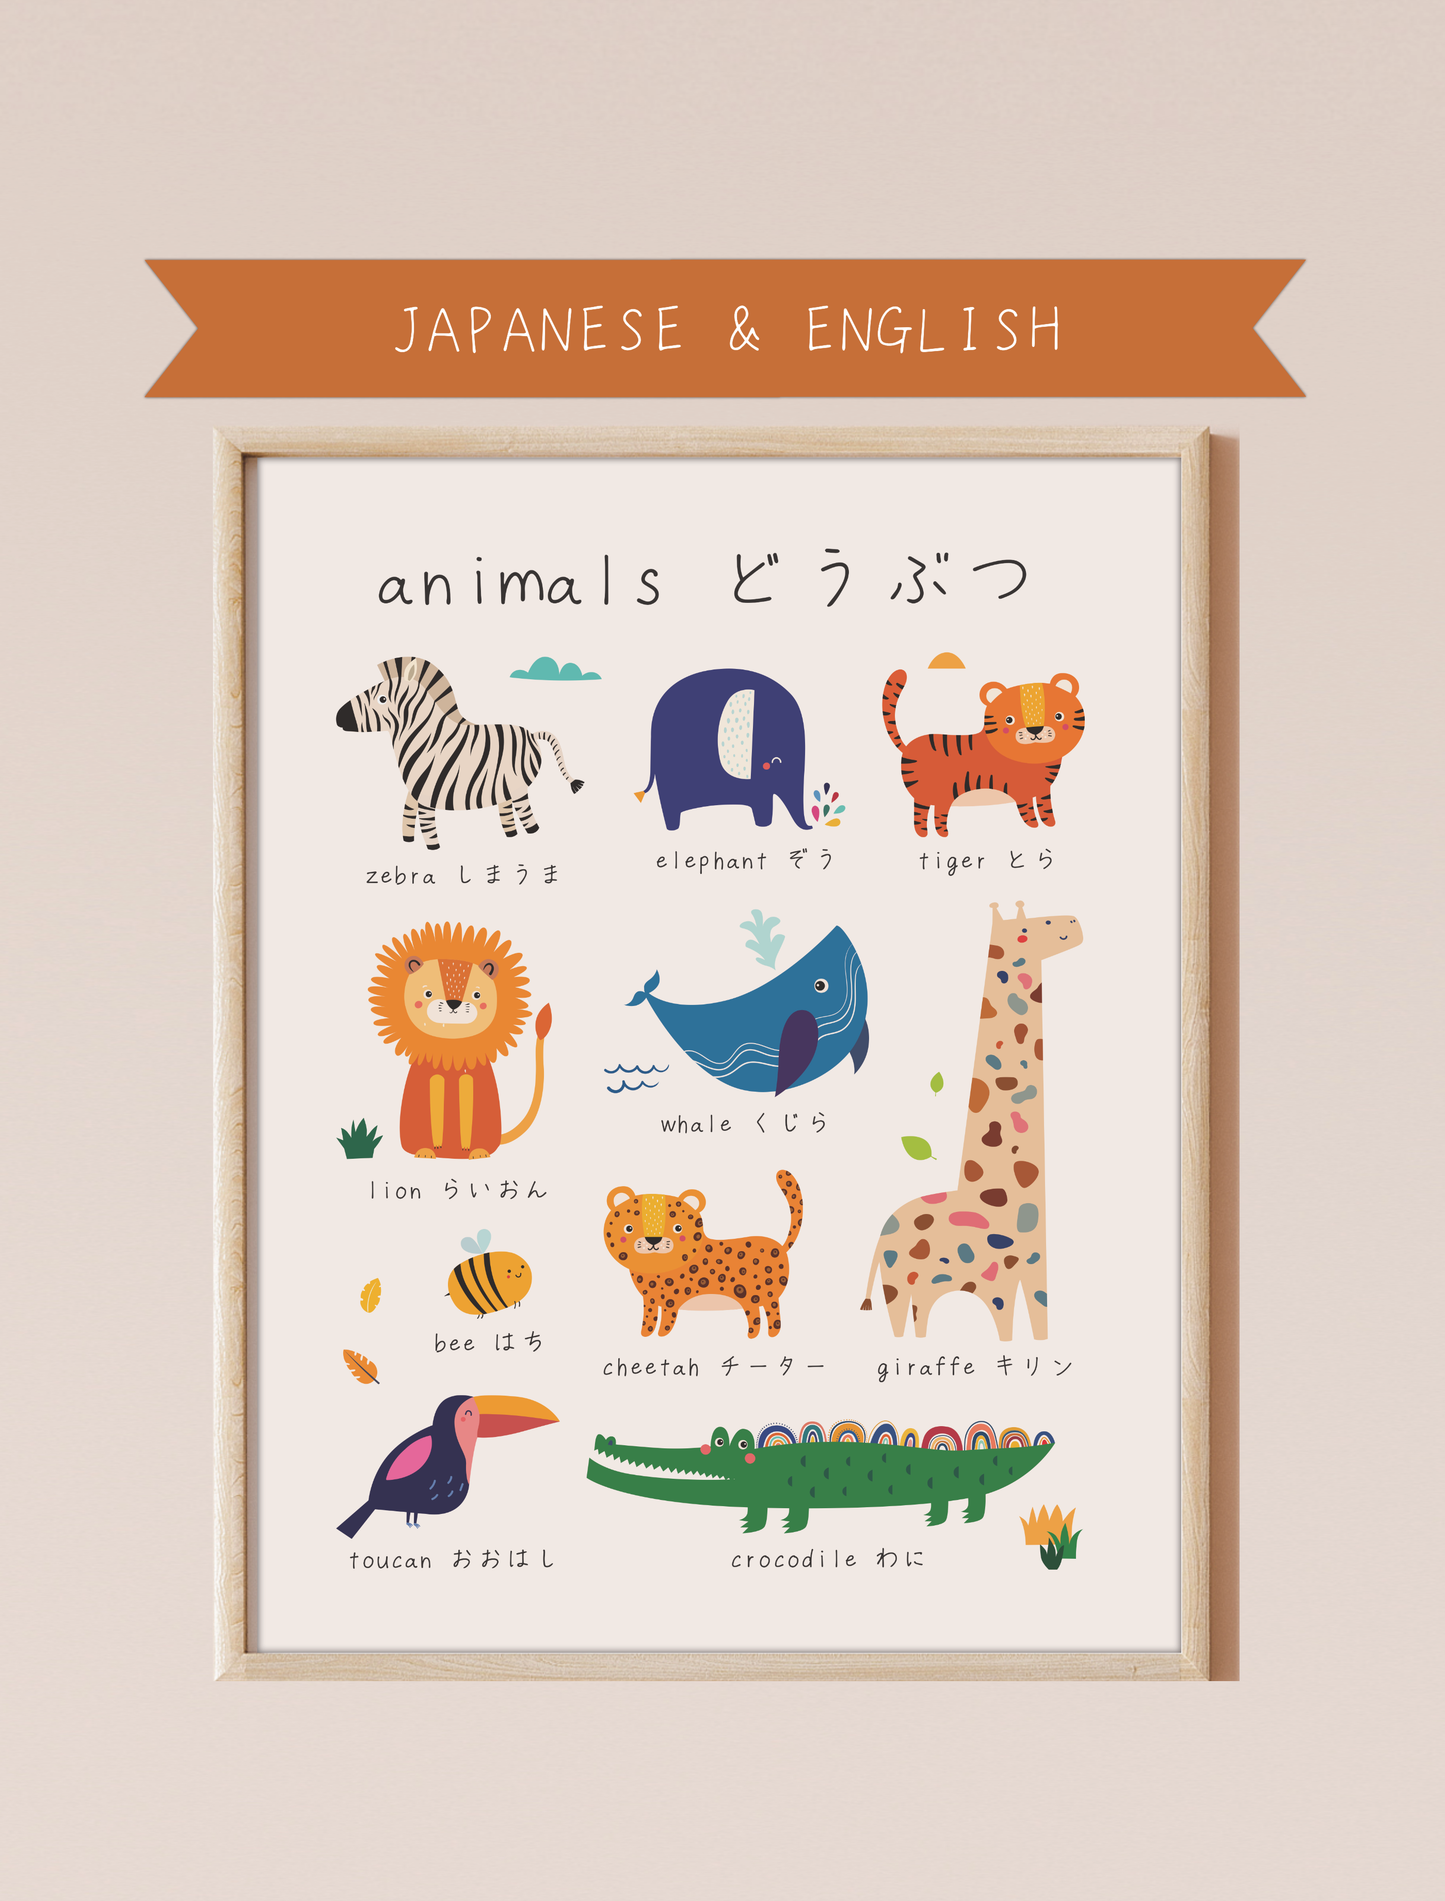 A bilingual educational print featuring animals labeled in English and Japanese. The print displays cute, colorful illustrations of the following animals: zebra, elephant, tiger, lion, whale, bee, cheetah, giraffe toucan, and crocodile . This bilingual display aids in language acquisition and cross-cultural learning.